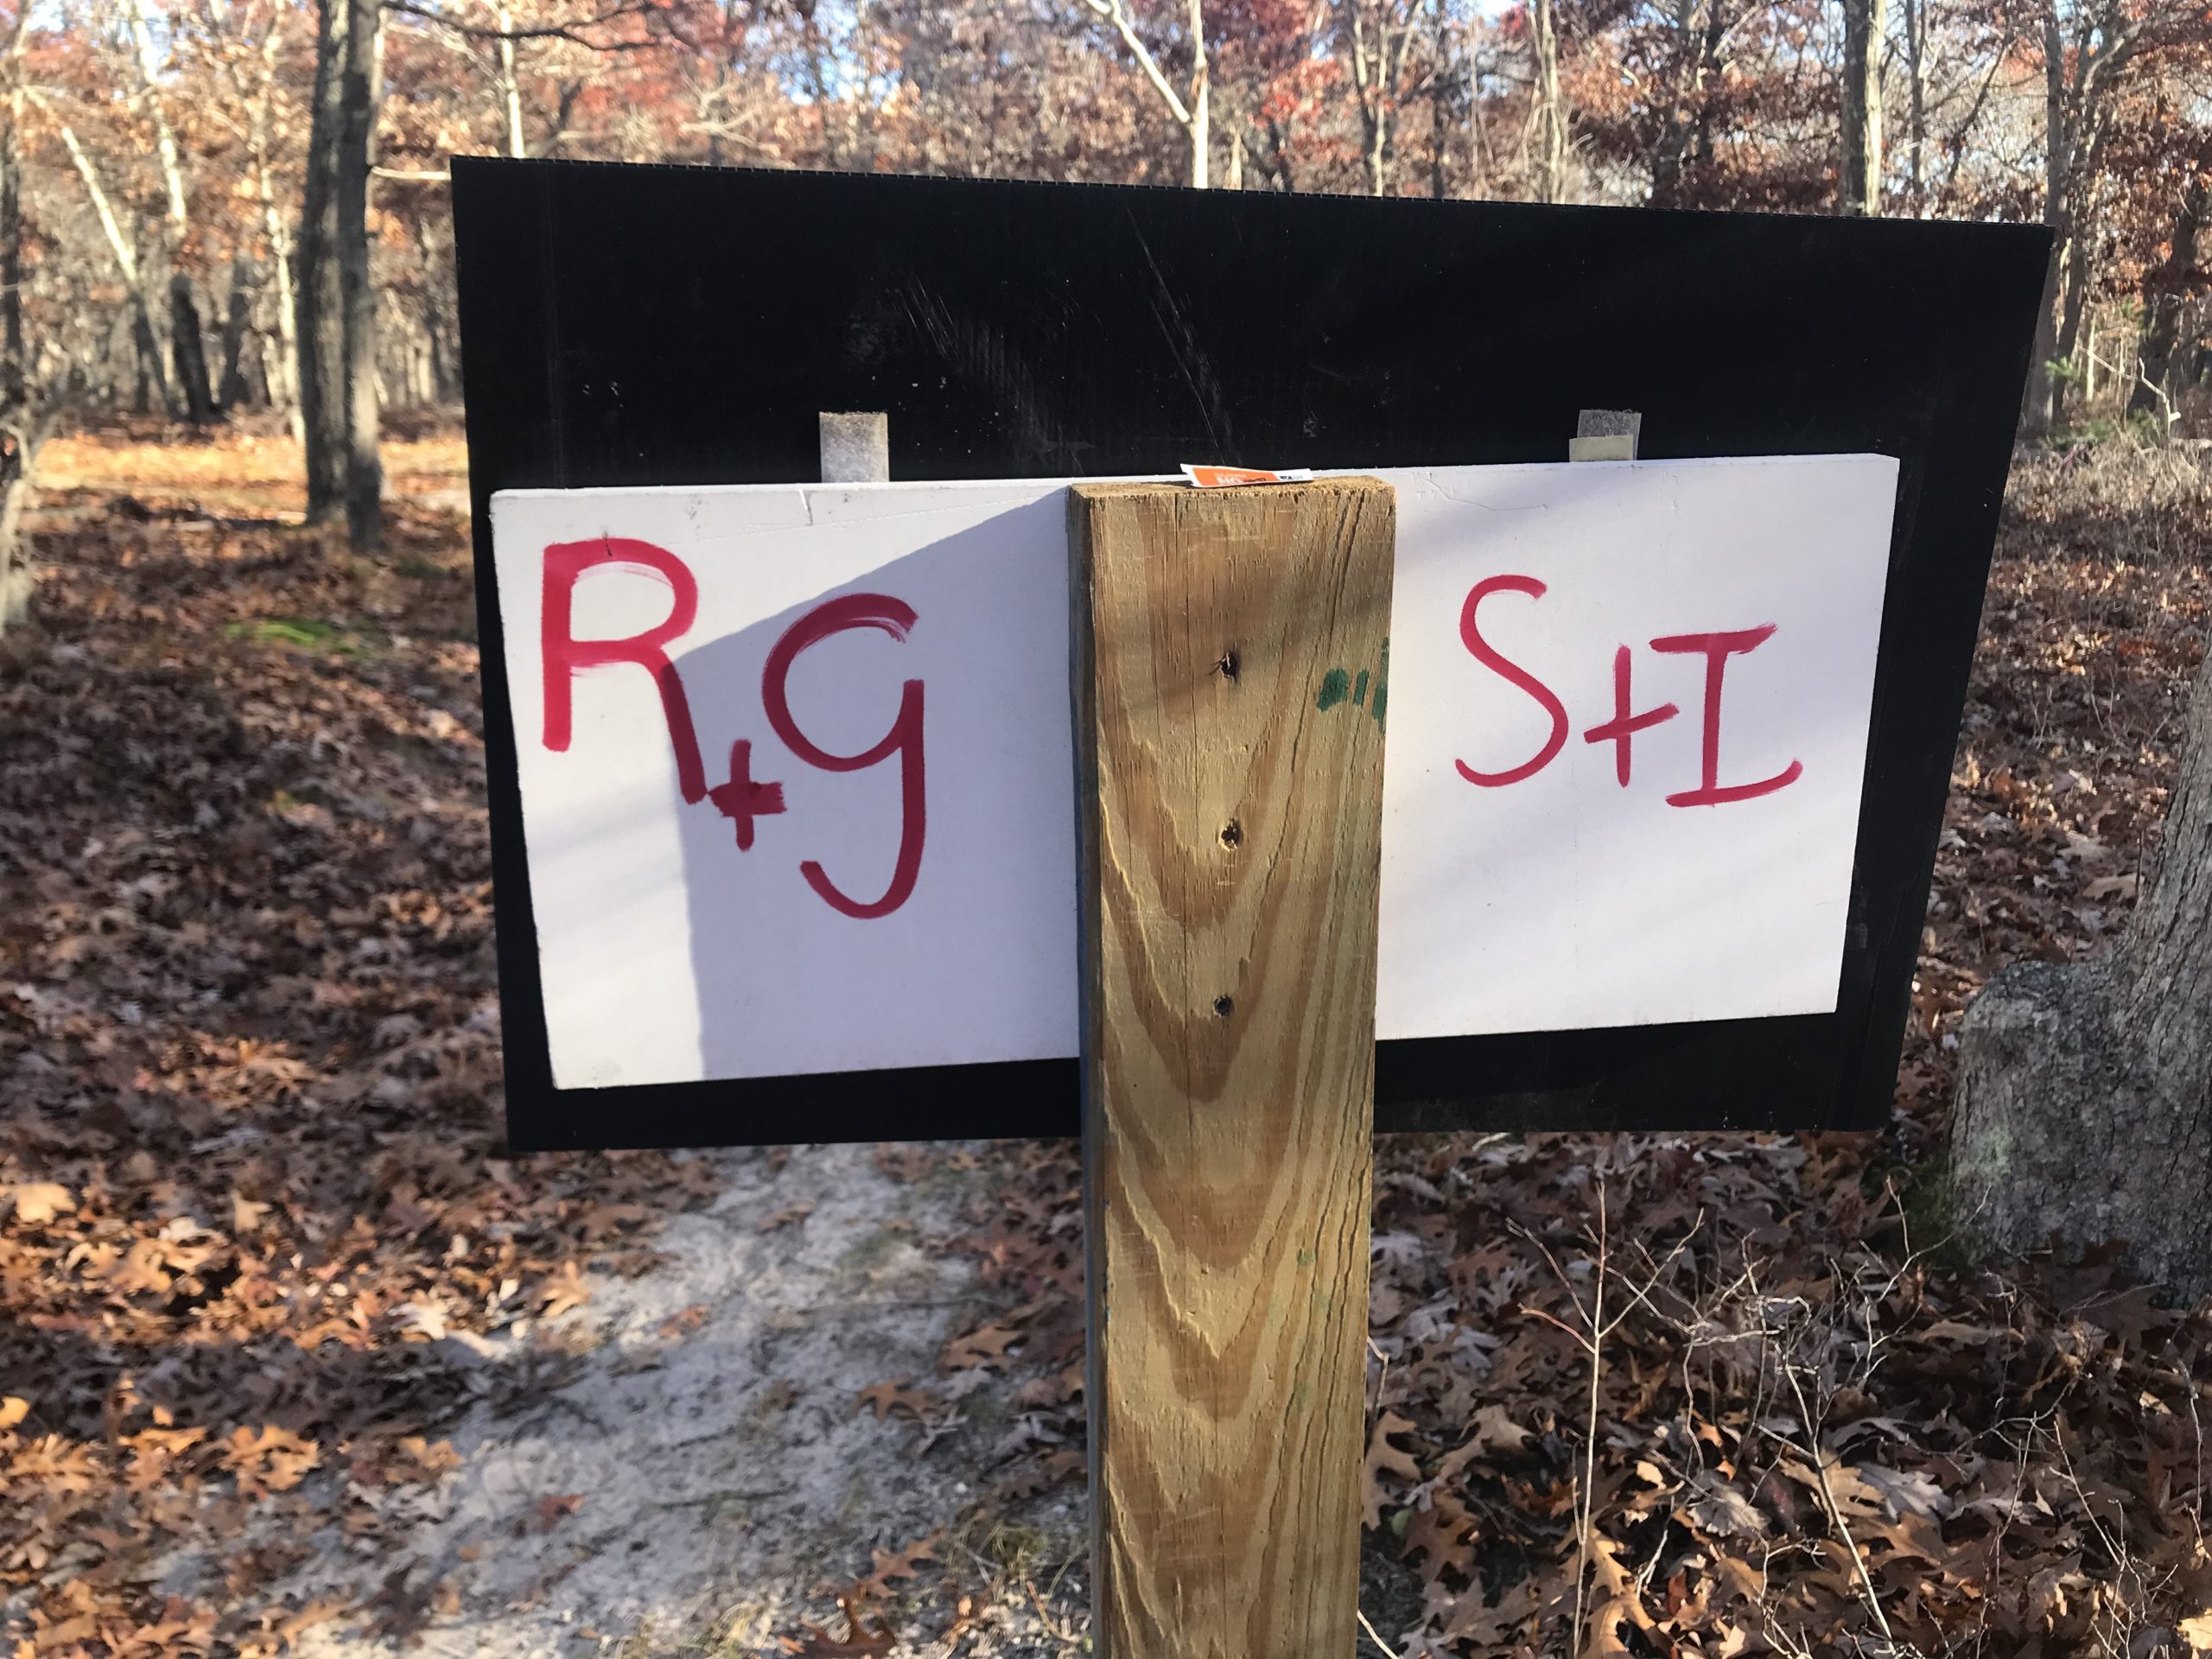 Signs on the Story Walk Trail in Sag Harbor's Mashashimuet Park were defaced by graffiti last week.